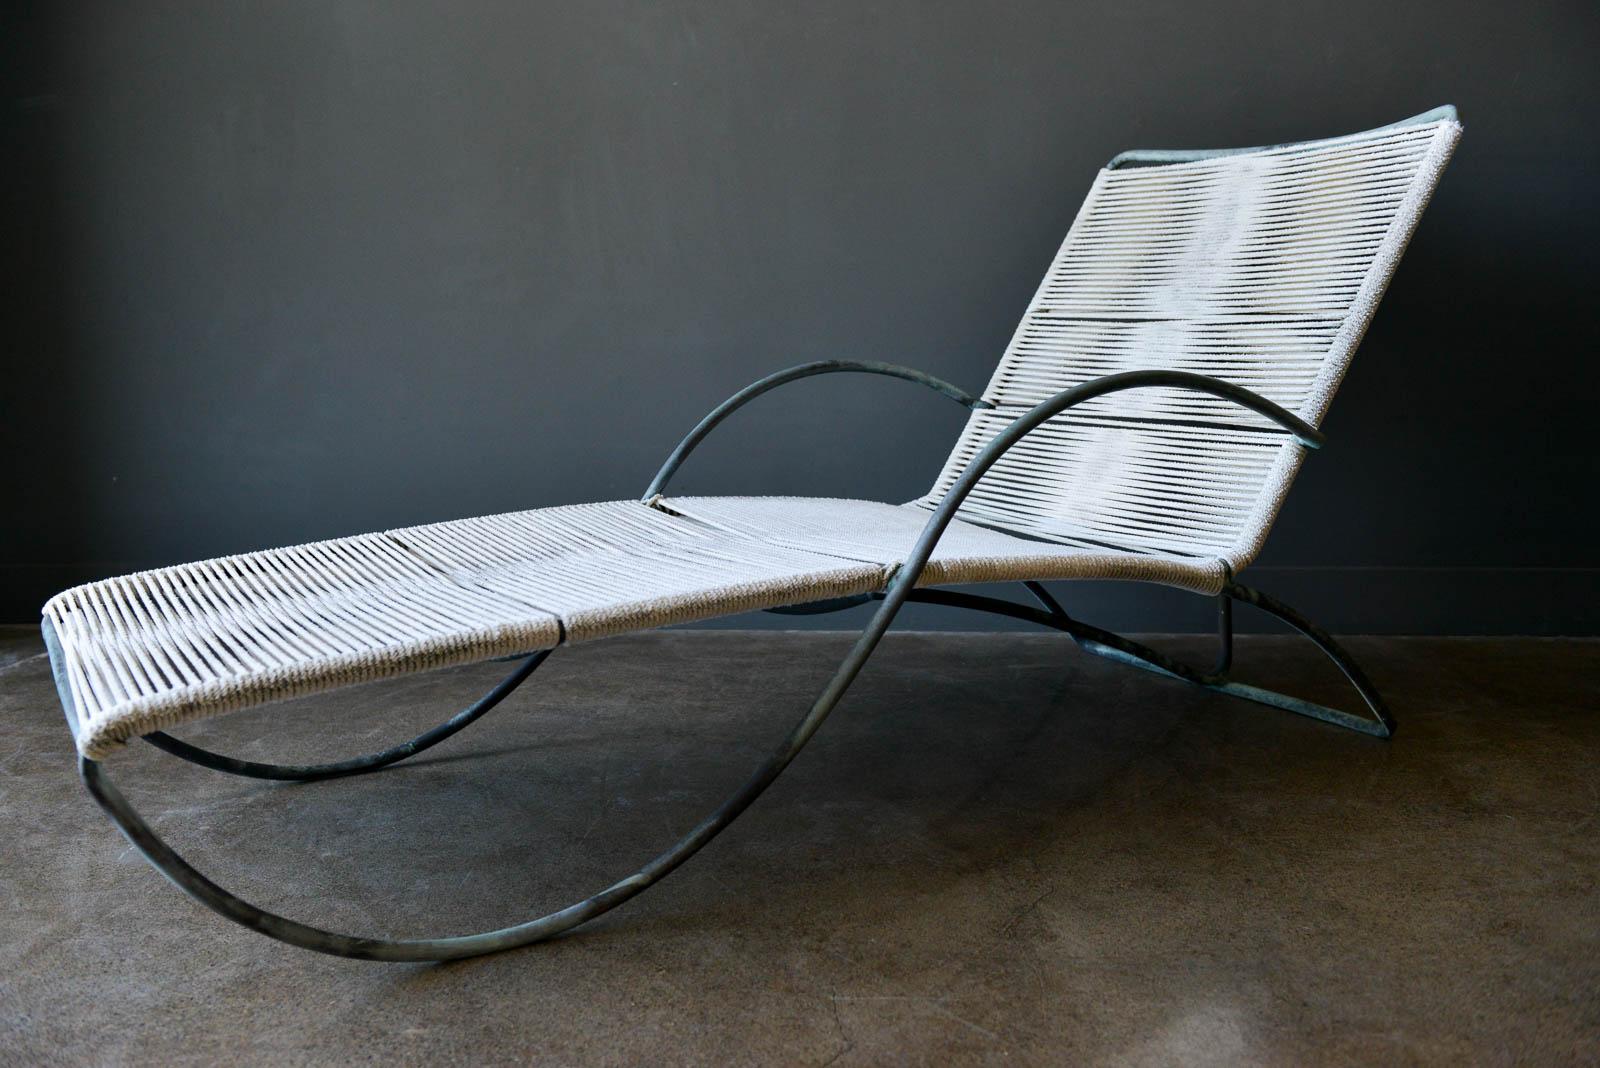 Vintage original Walter lamb S chaise lounge chair, Model C-4700 ca. 1955 chaise lounge with tubular copper/bronze frames with patina designed by Walter Lamb in the 1950s. The model C-4700 has an S-shaped frame that flows beautifully from the arms